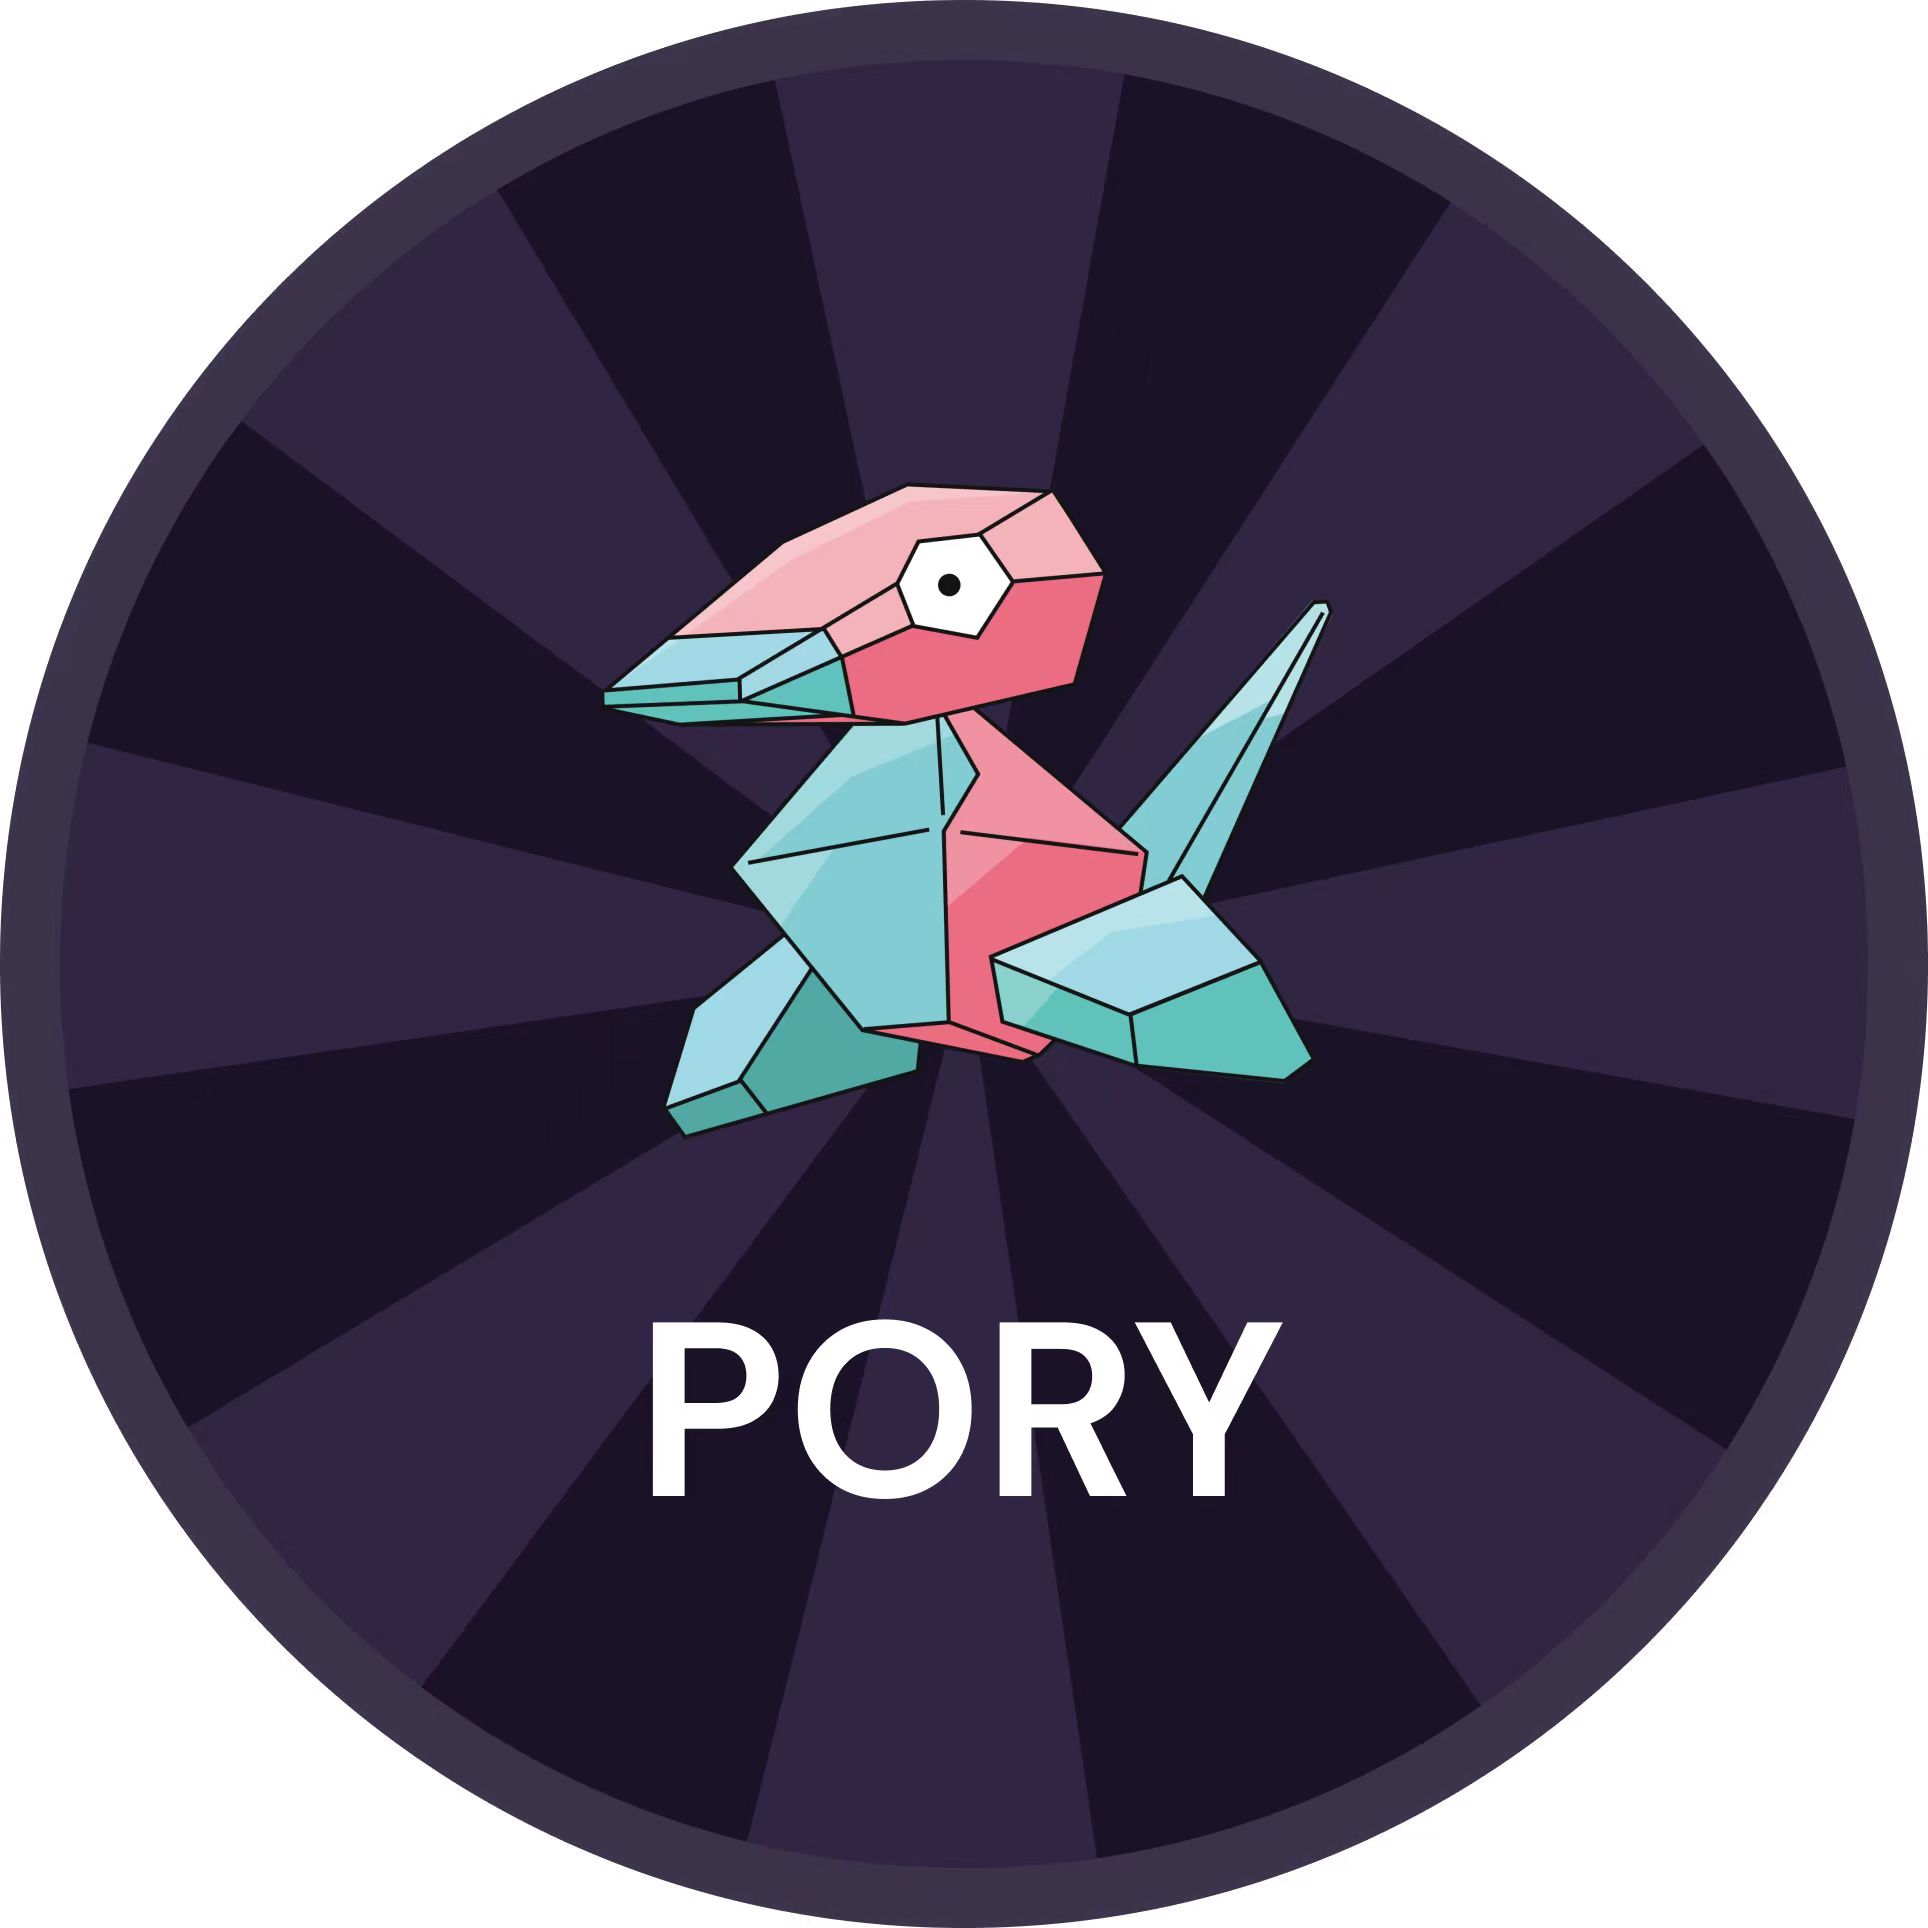 , PORY Emerges as Top Meme Coin on Polygon (MATIC) Network, Paving the Way for Broader Cryptocurrency Recognition